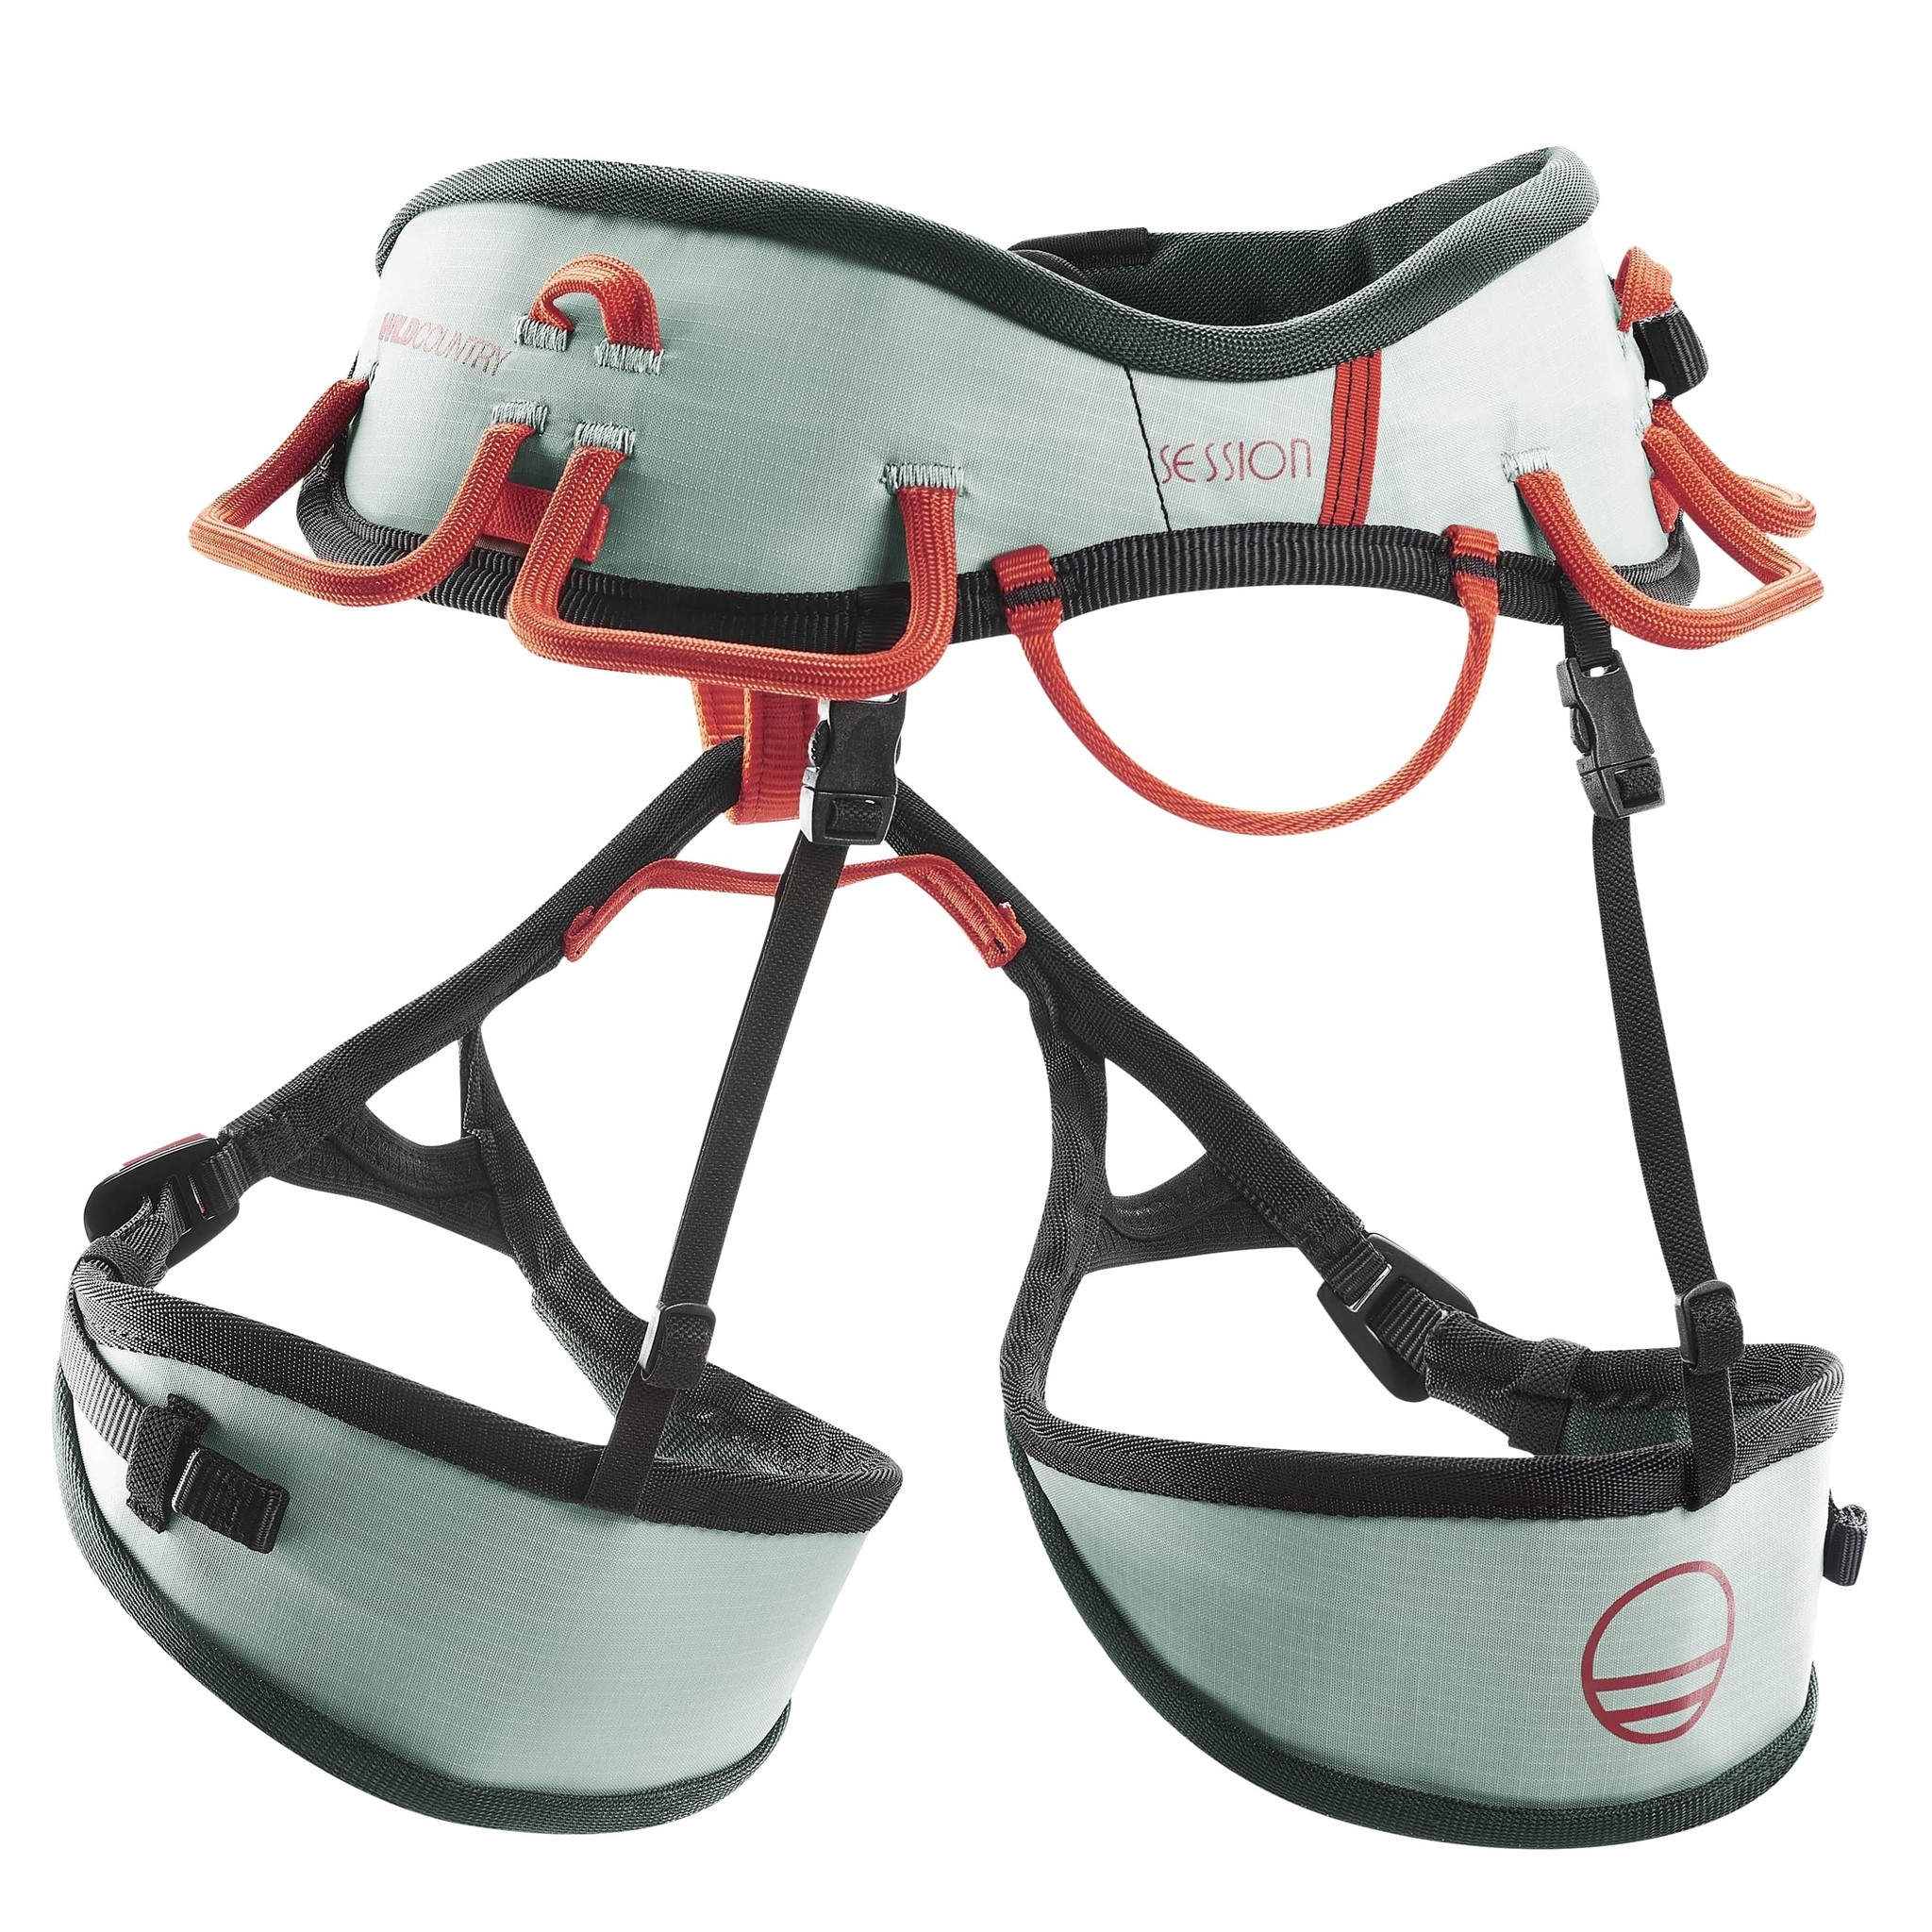 XS, S, M 12277 Type C Wild Country Mission Climbing Harness Women's Tropical 